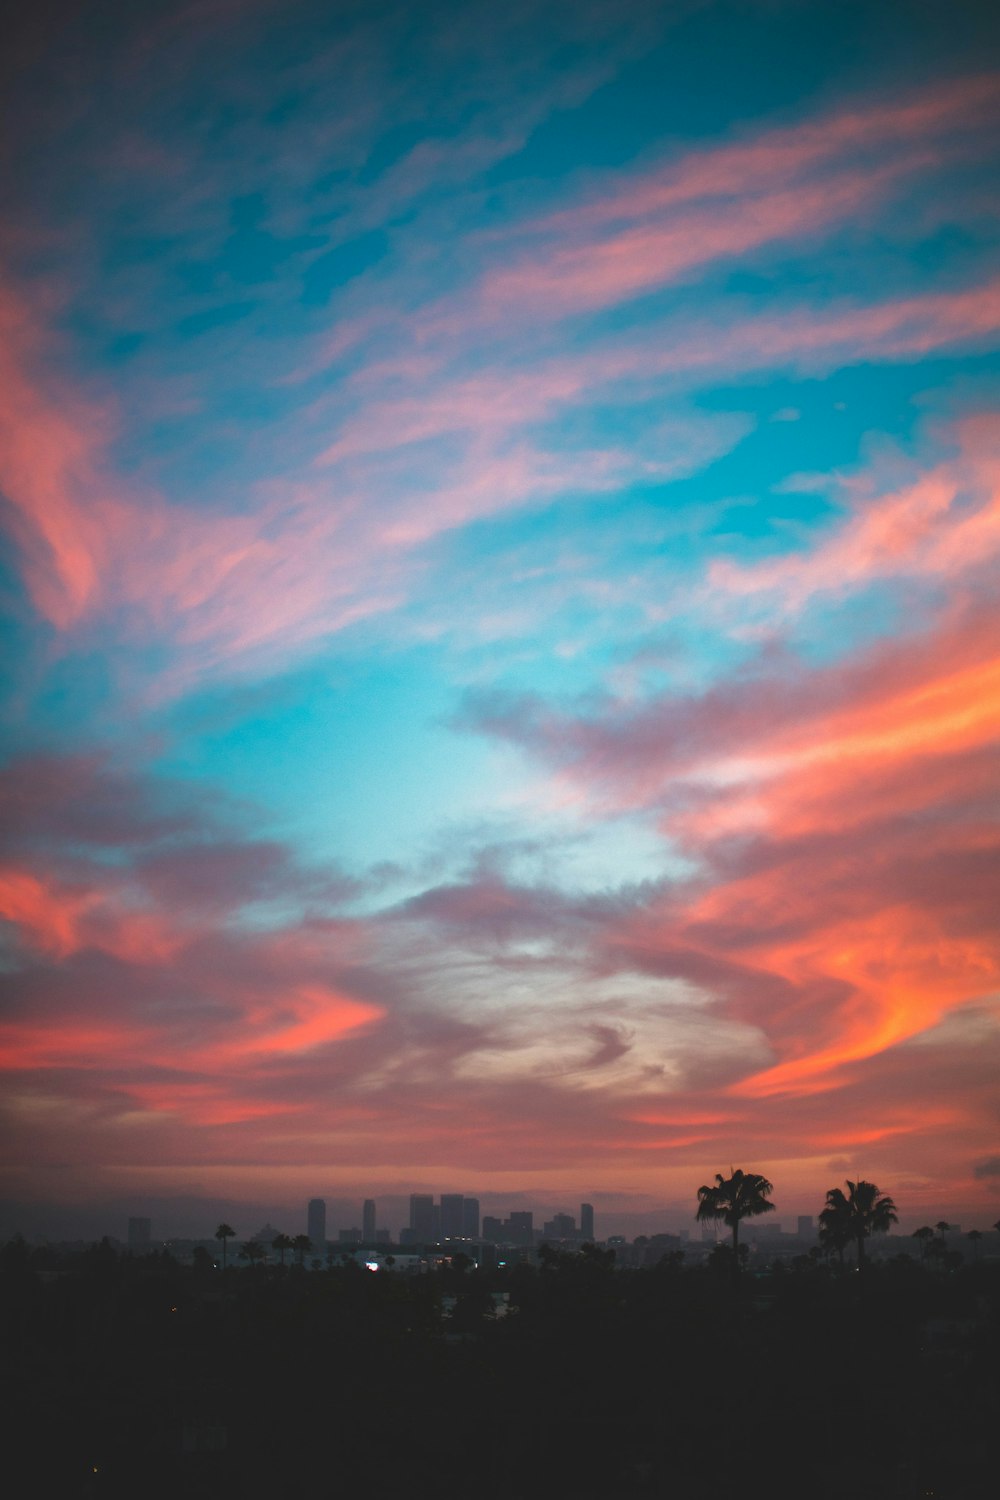 500+ Sunset Cloud Pictures [Stunning!] | Download Free Images on Unsplash